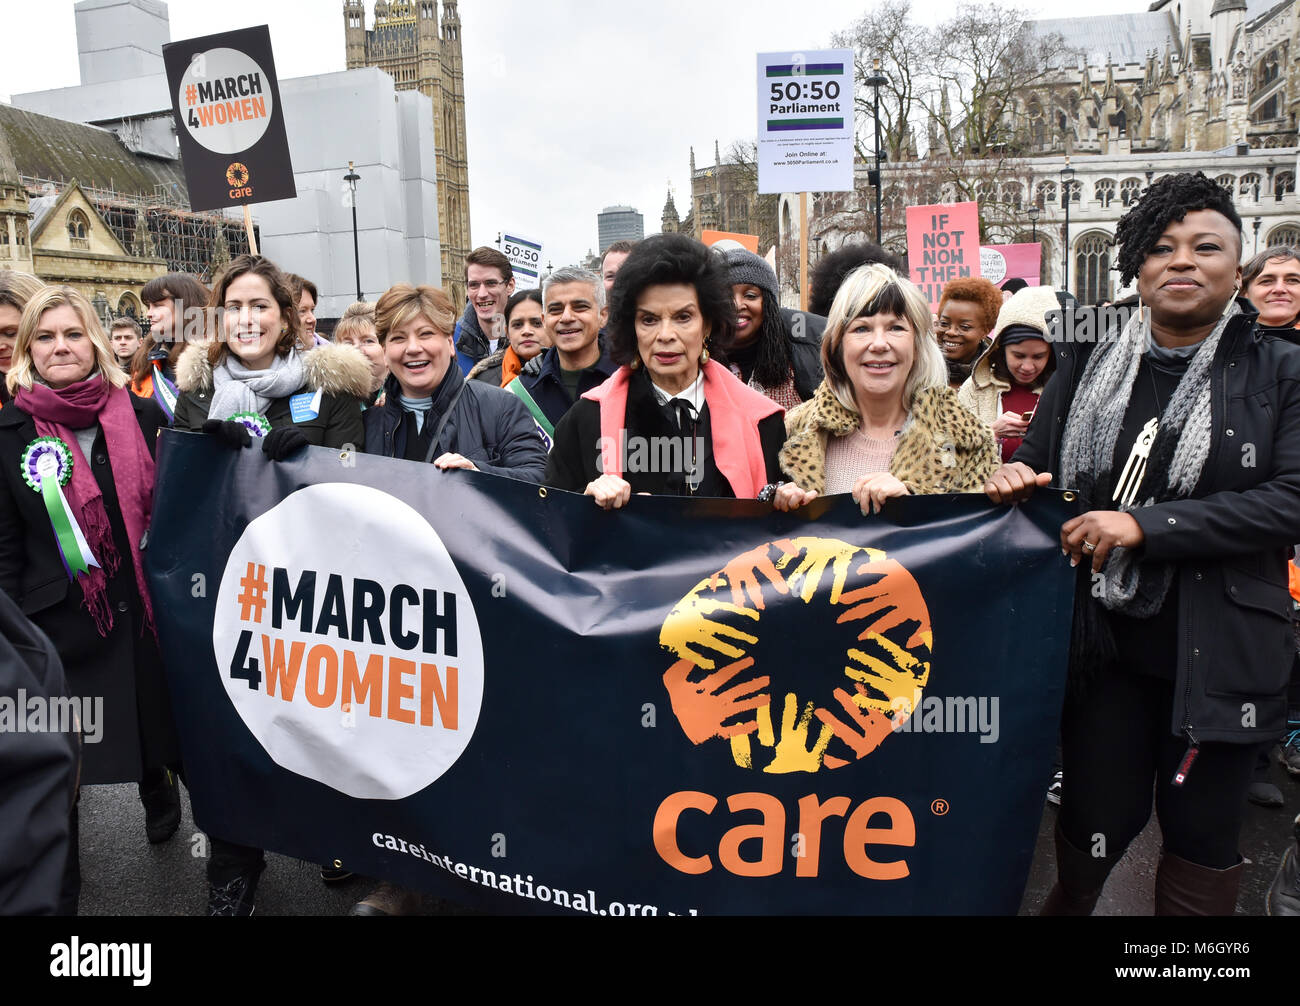 Westminster, London, UK. 4th March 2018. The annual March4Women march from Parliament to Trafalgar Square in central London to celebrate International Women’s Day and 100 years since women in the UK first gained the right to vote. Stock Photo